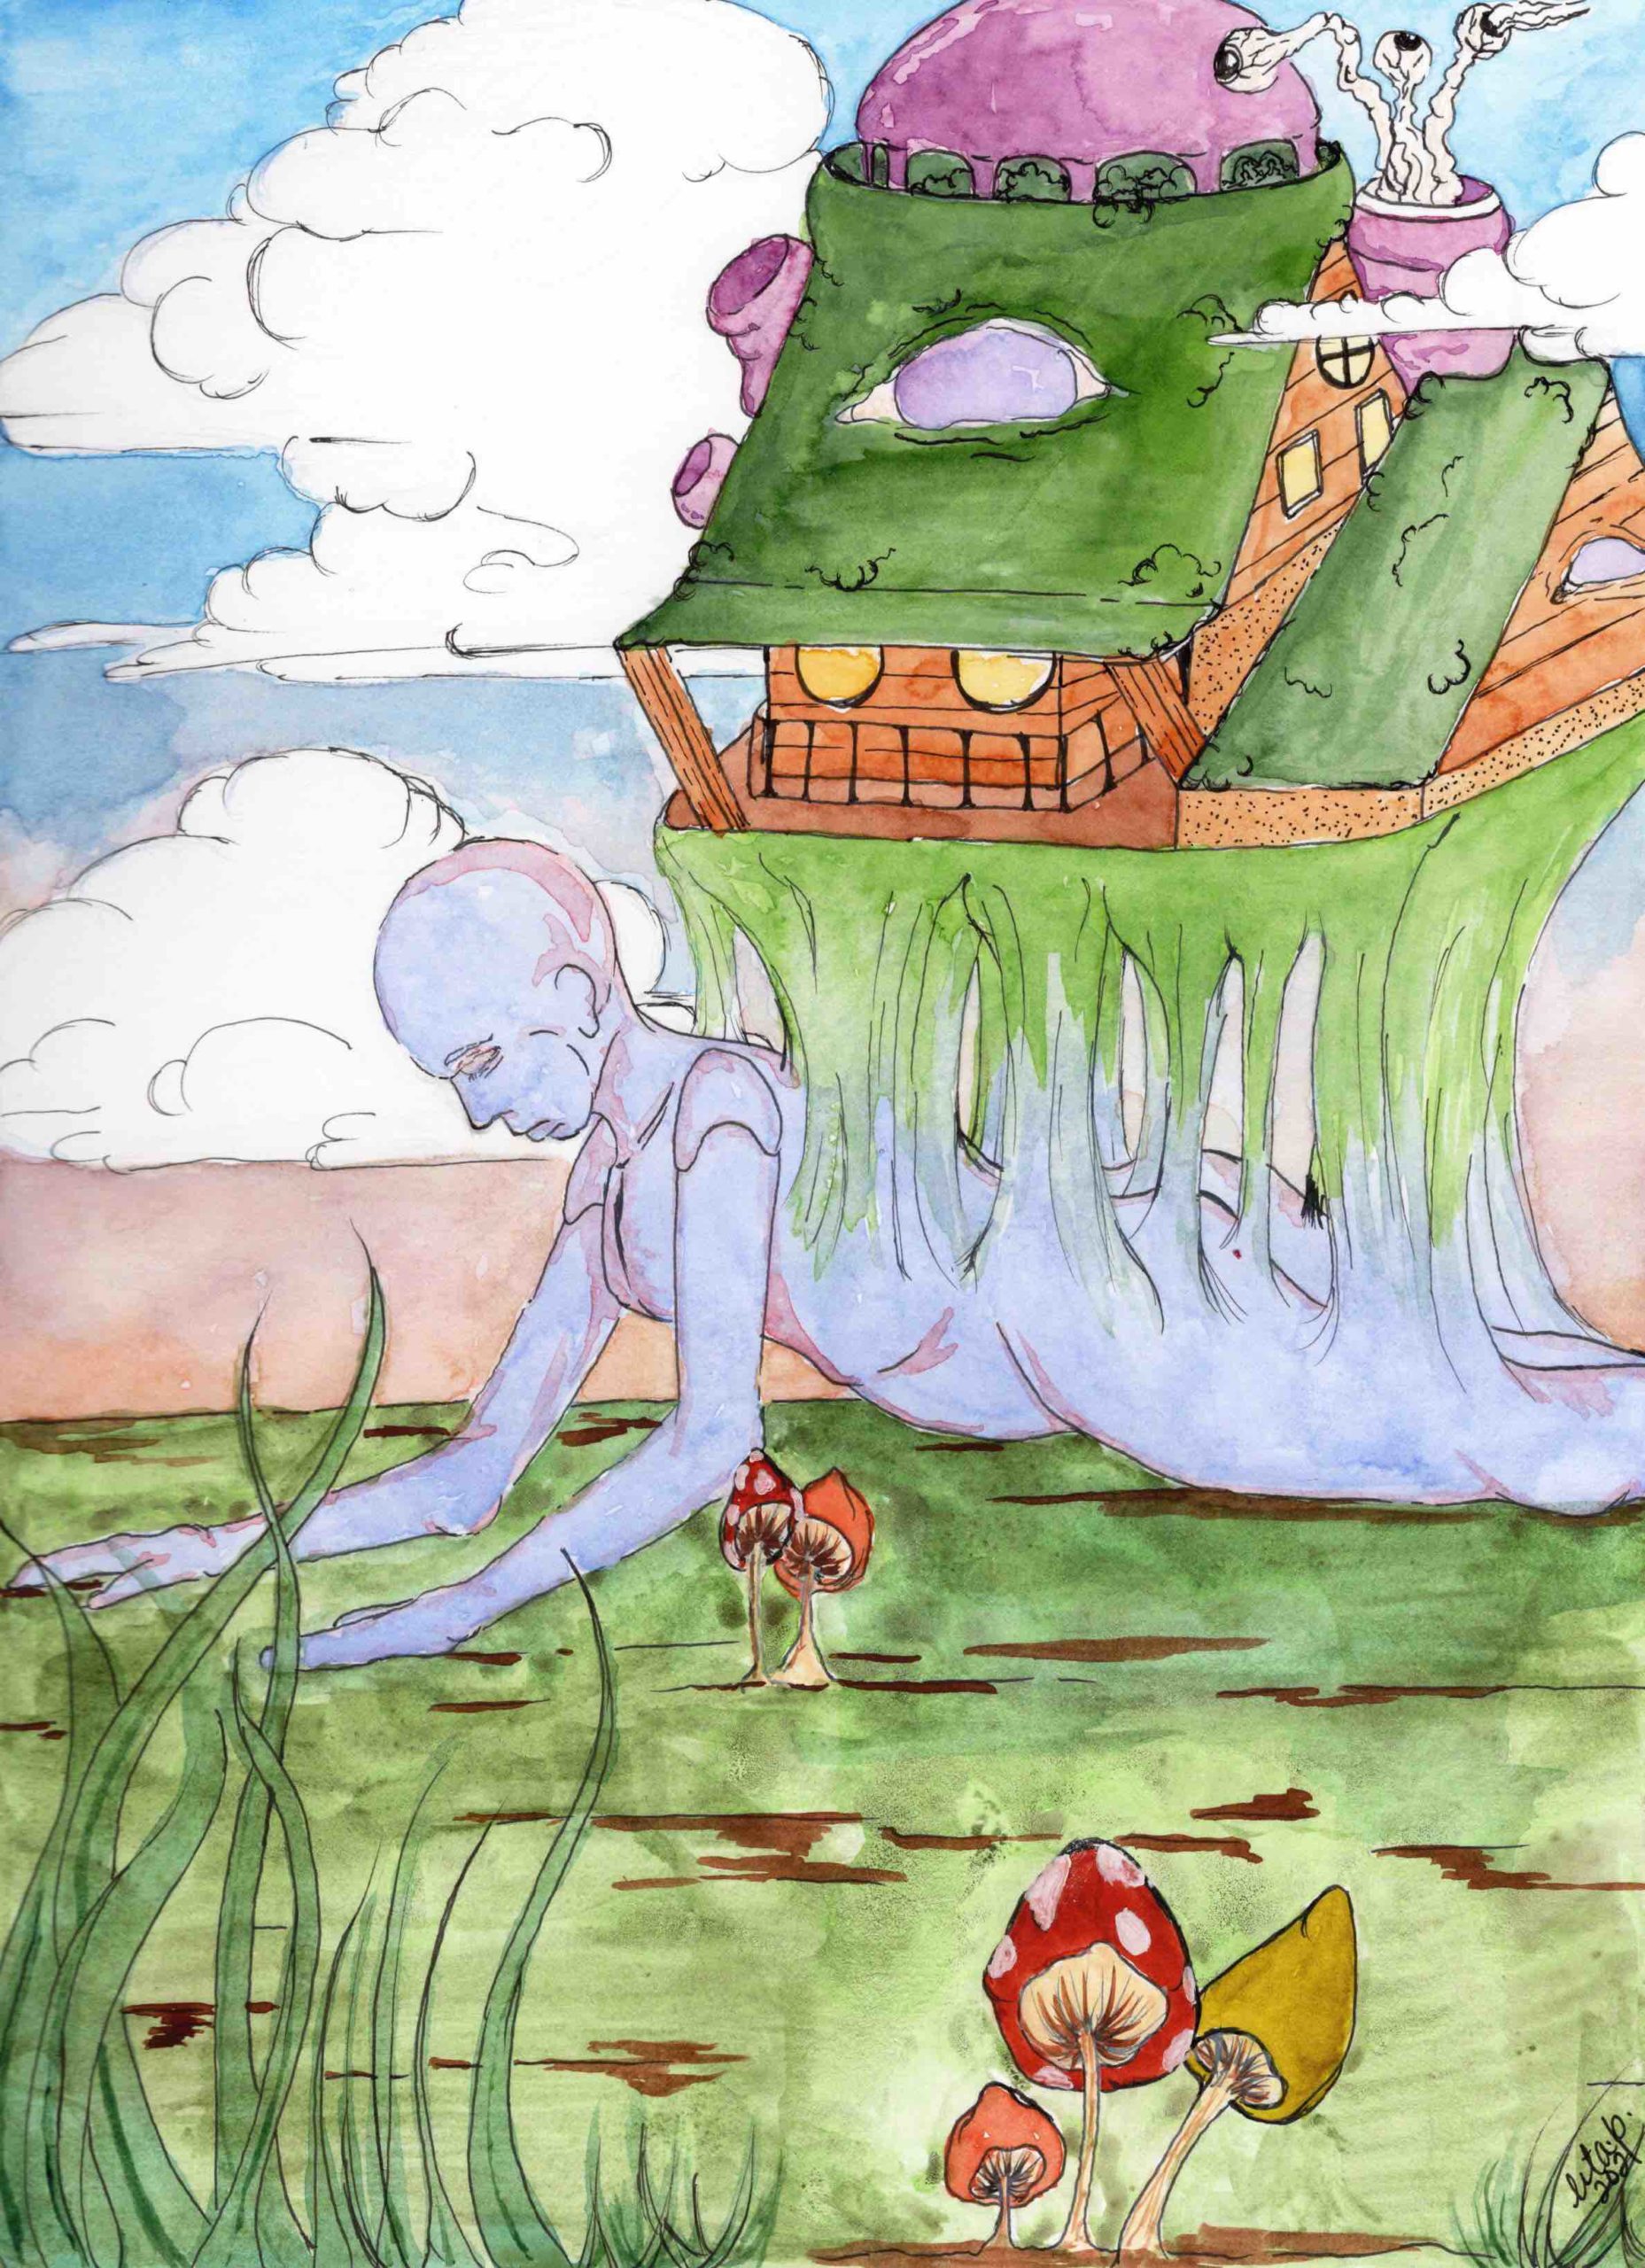 This is a pen drawing colourized with watercolour, coloured pencil, and guache. A light blue figure drags itself across a green and brown landscape, barren except for a couple patches of bright-capped mushroom and tall grass. Arising from the figure’s back by stretched lines of flesh is a brown wood edifice with green vegetative roofs. The round windows show warm yellow light from within. From an organic purple chimney, three eyeballs float upwards on white tendrils, towards pleasant white cumulous clouds.